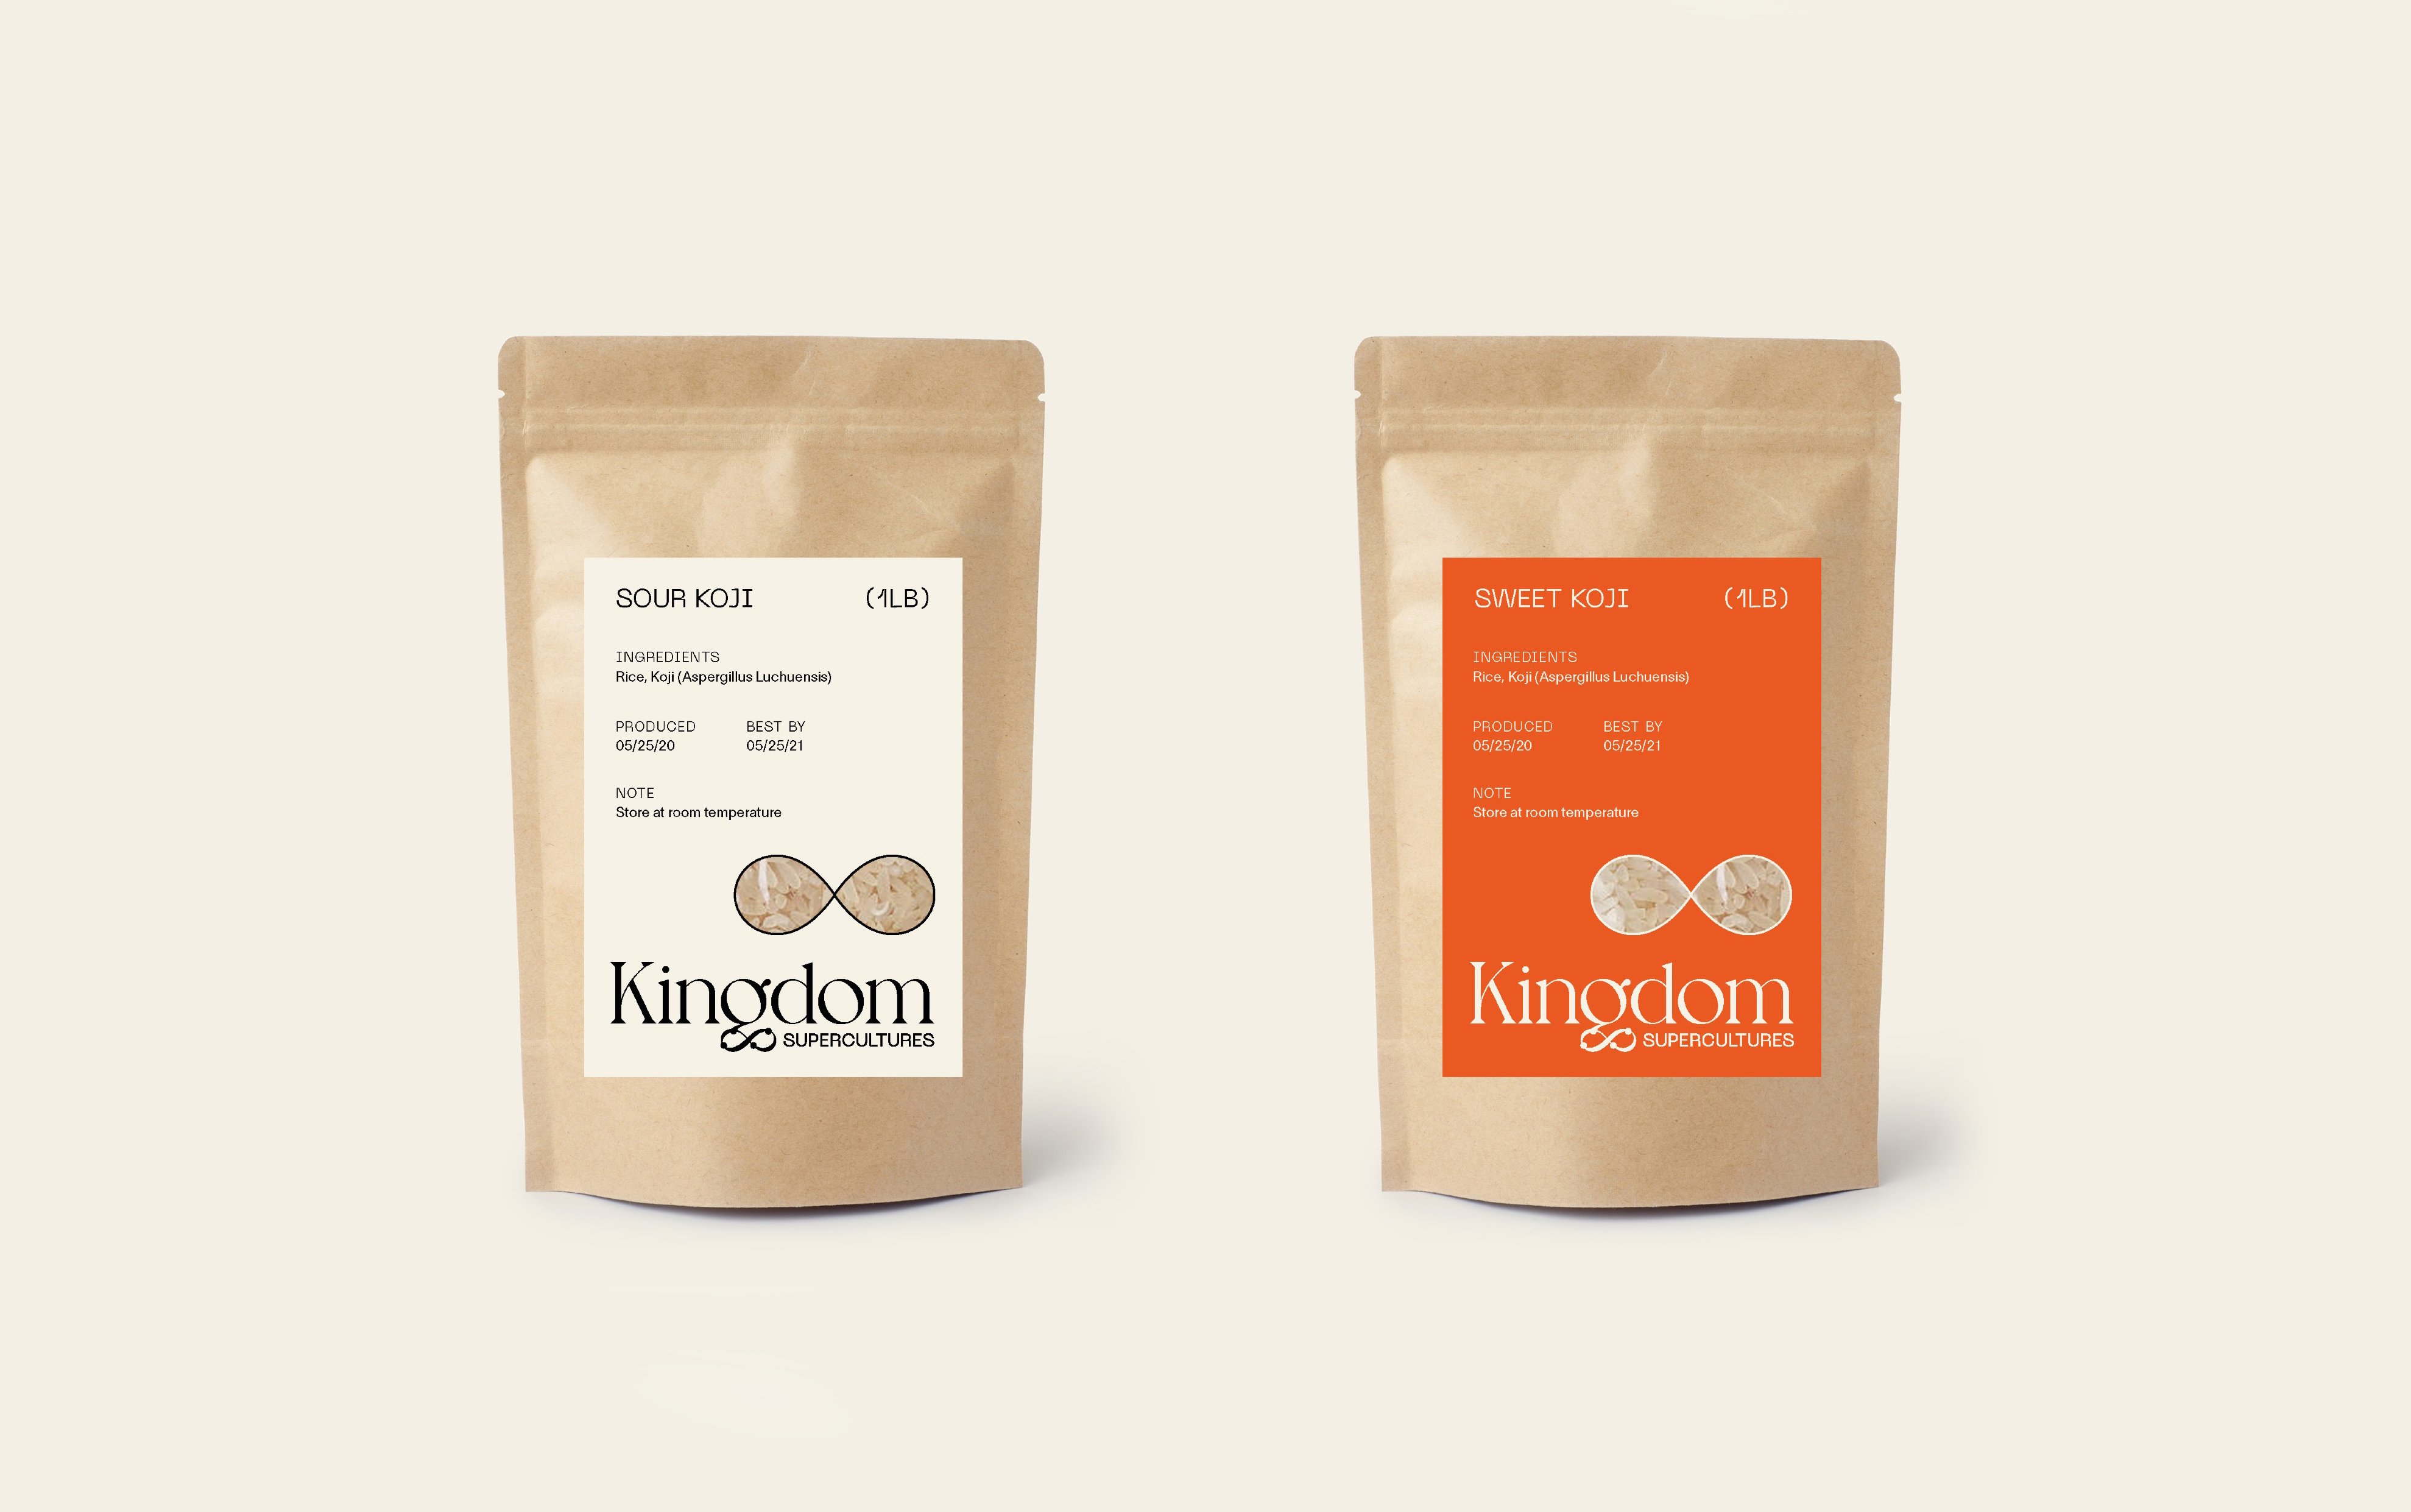 Kingdom Supercultures packaging, designed by RoAndCo Studio 